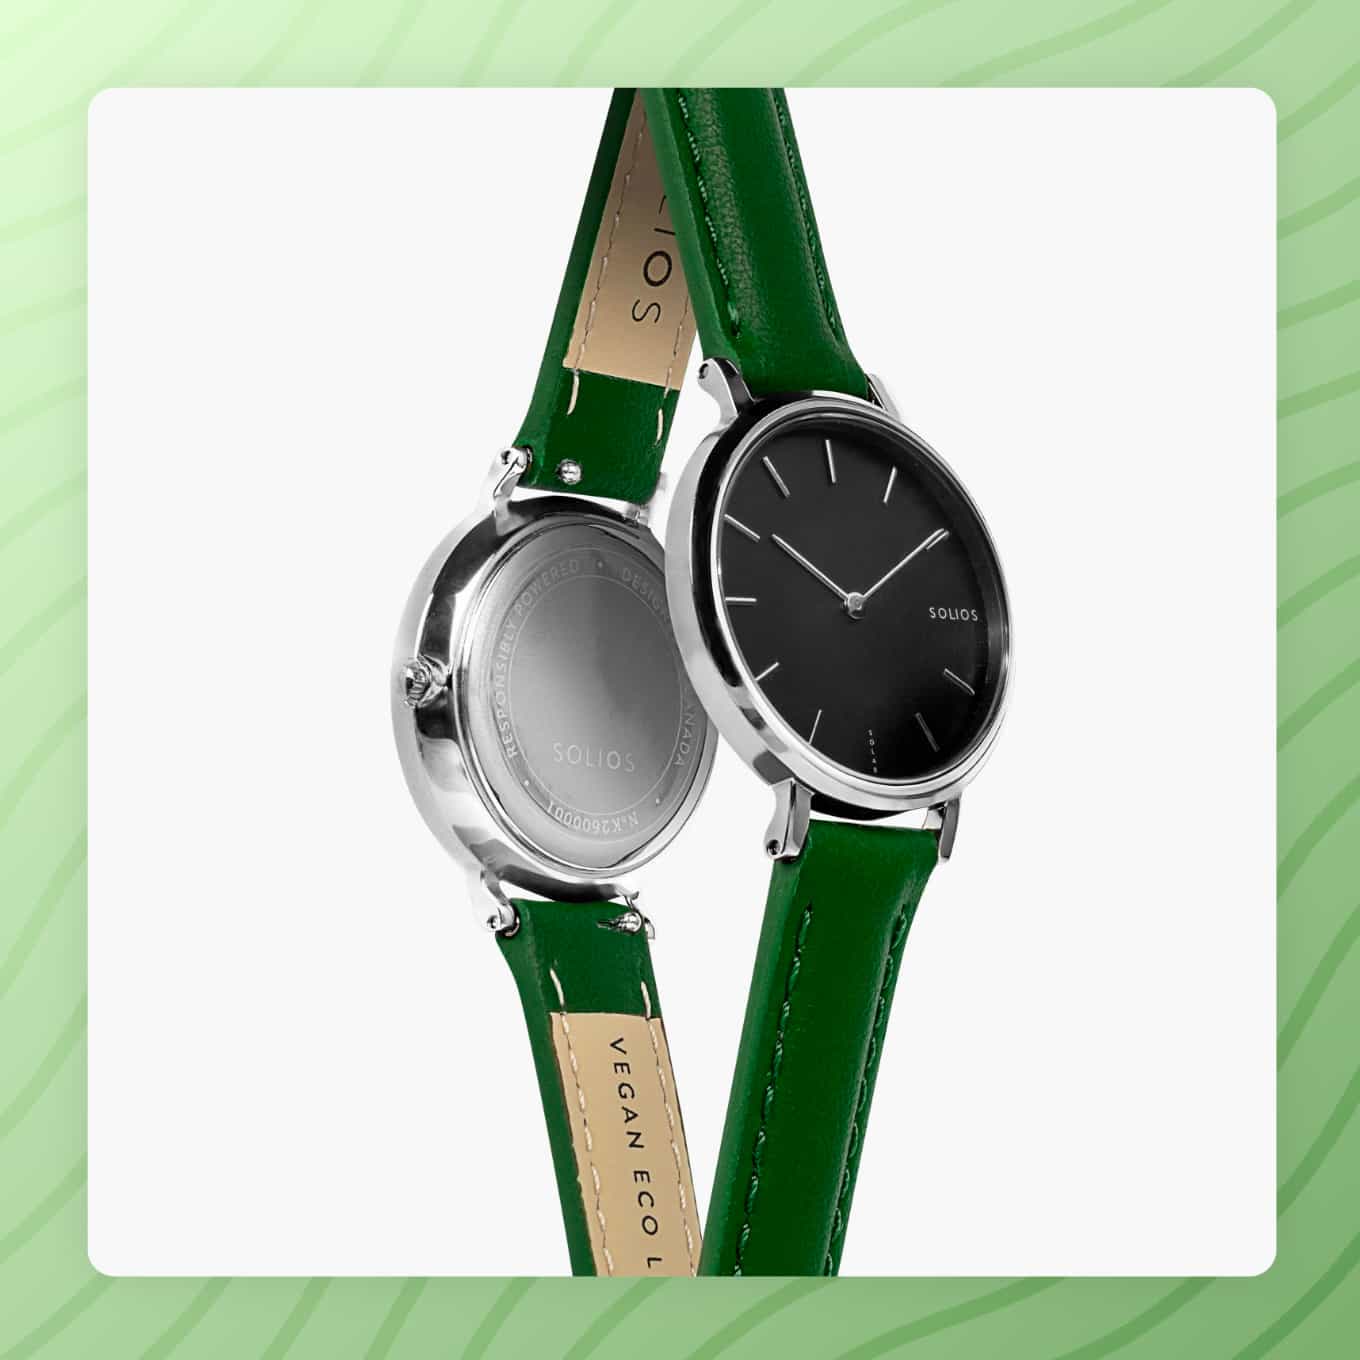 A sleek watch from Solios featuring a green watch band